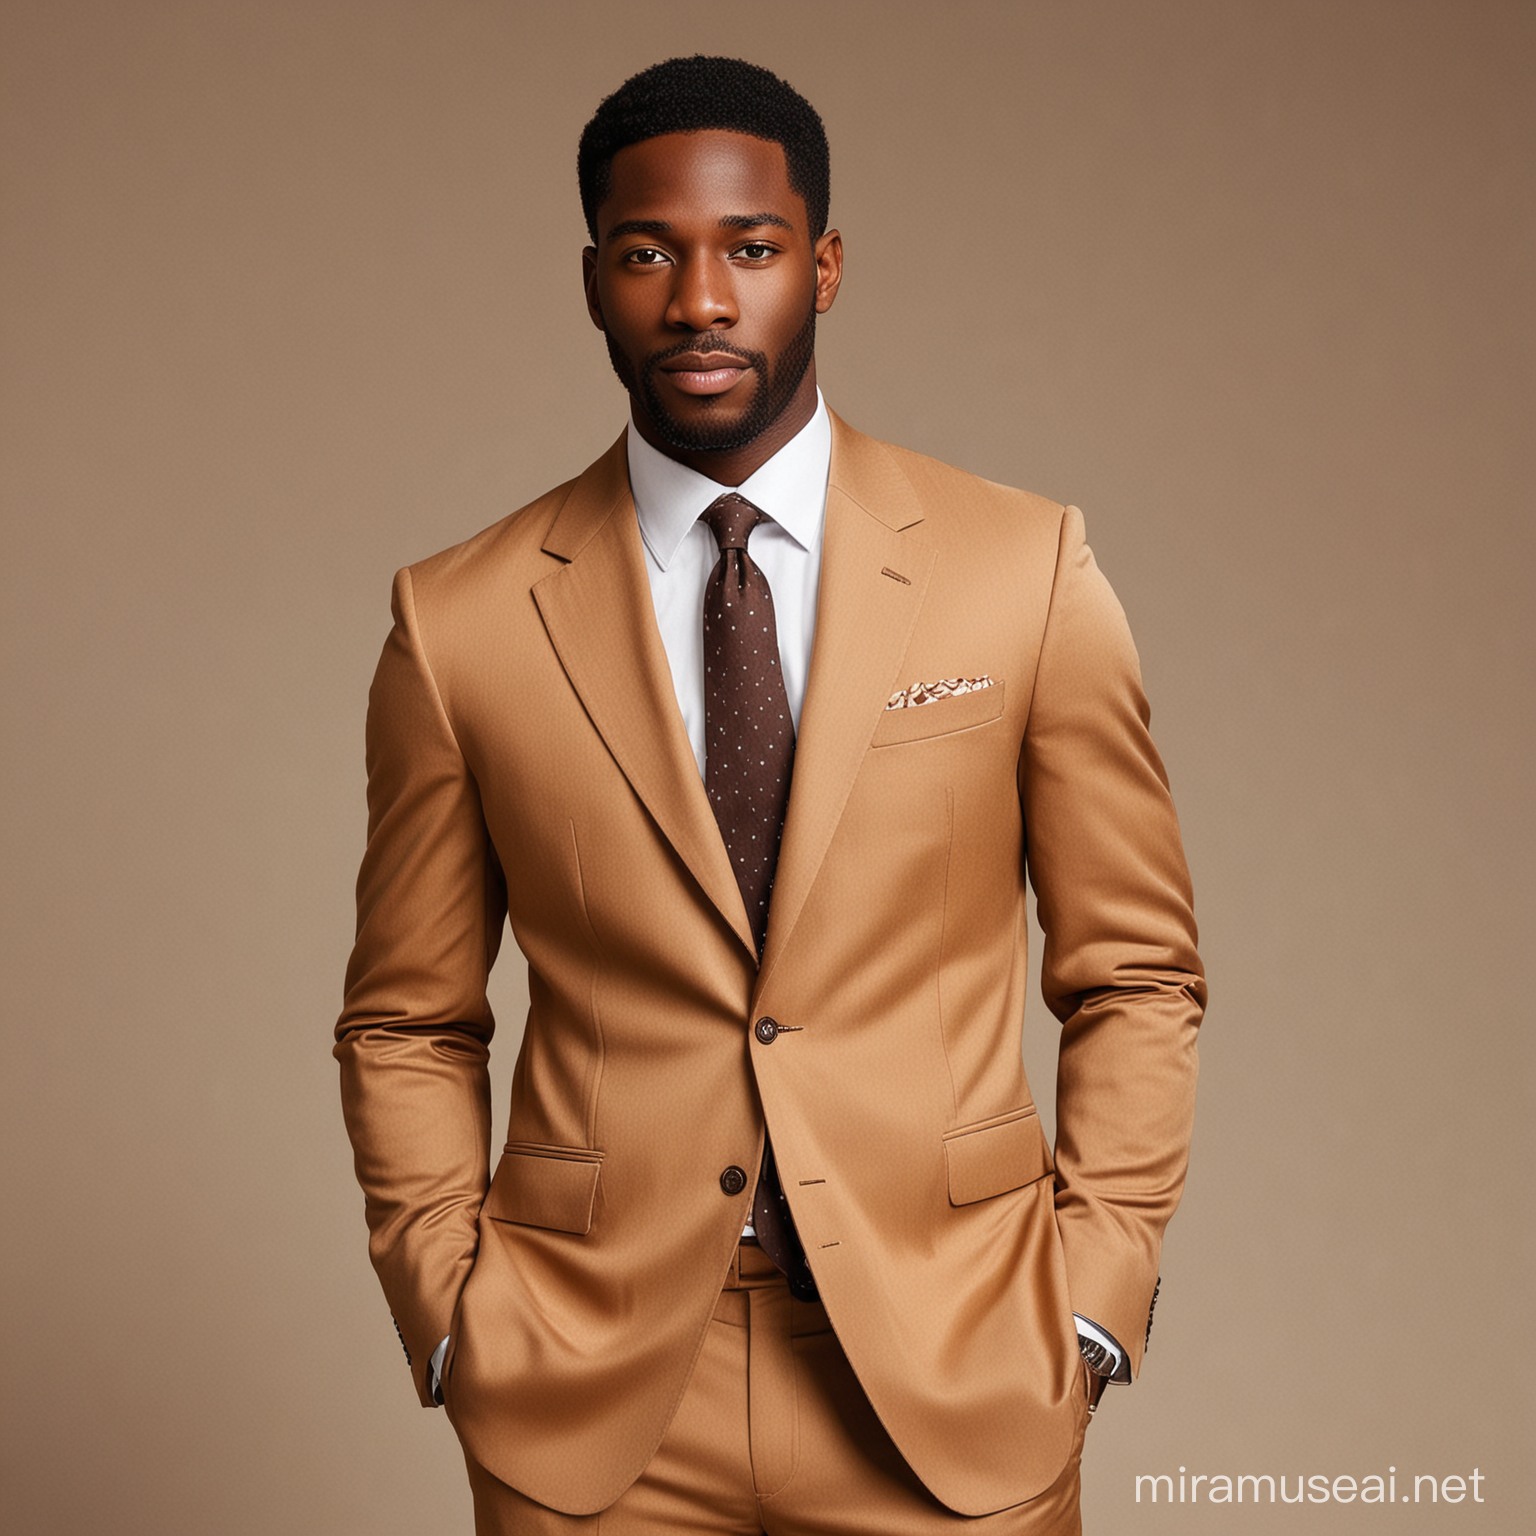 Stylish Black Man in Elegant Brown Suit with Confidence and Charm